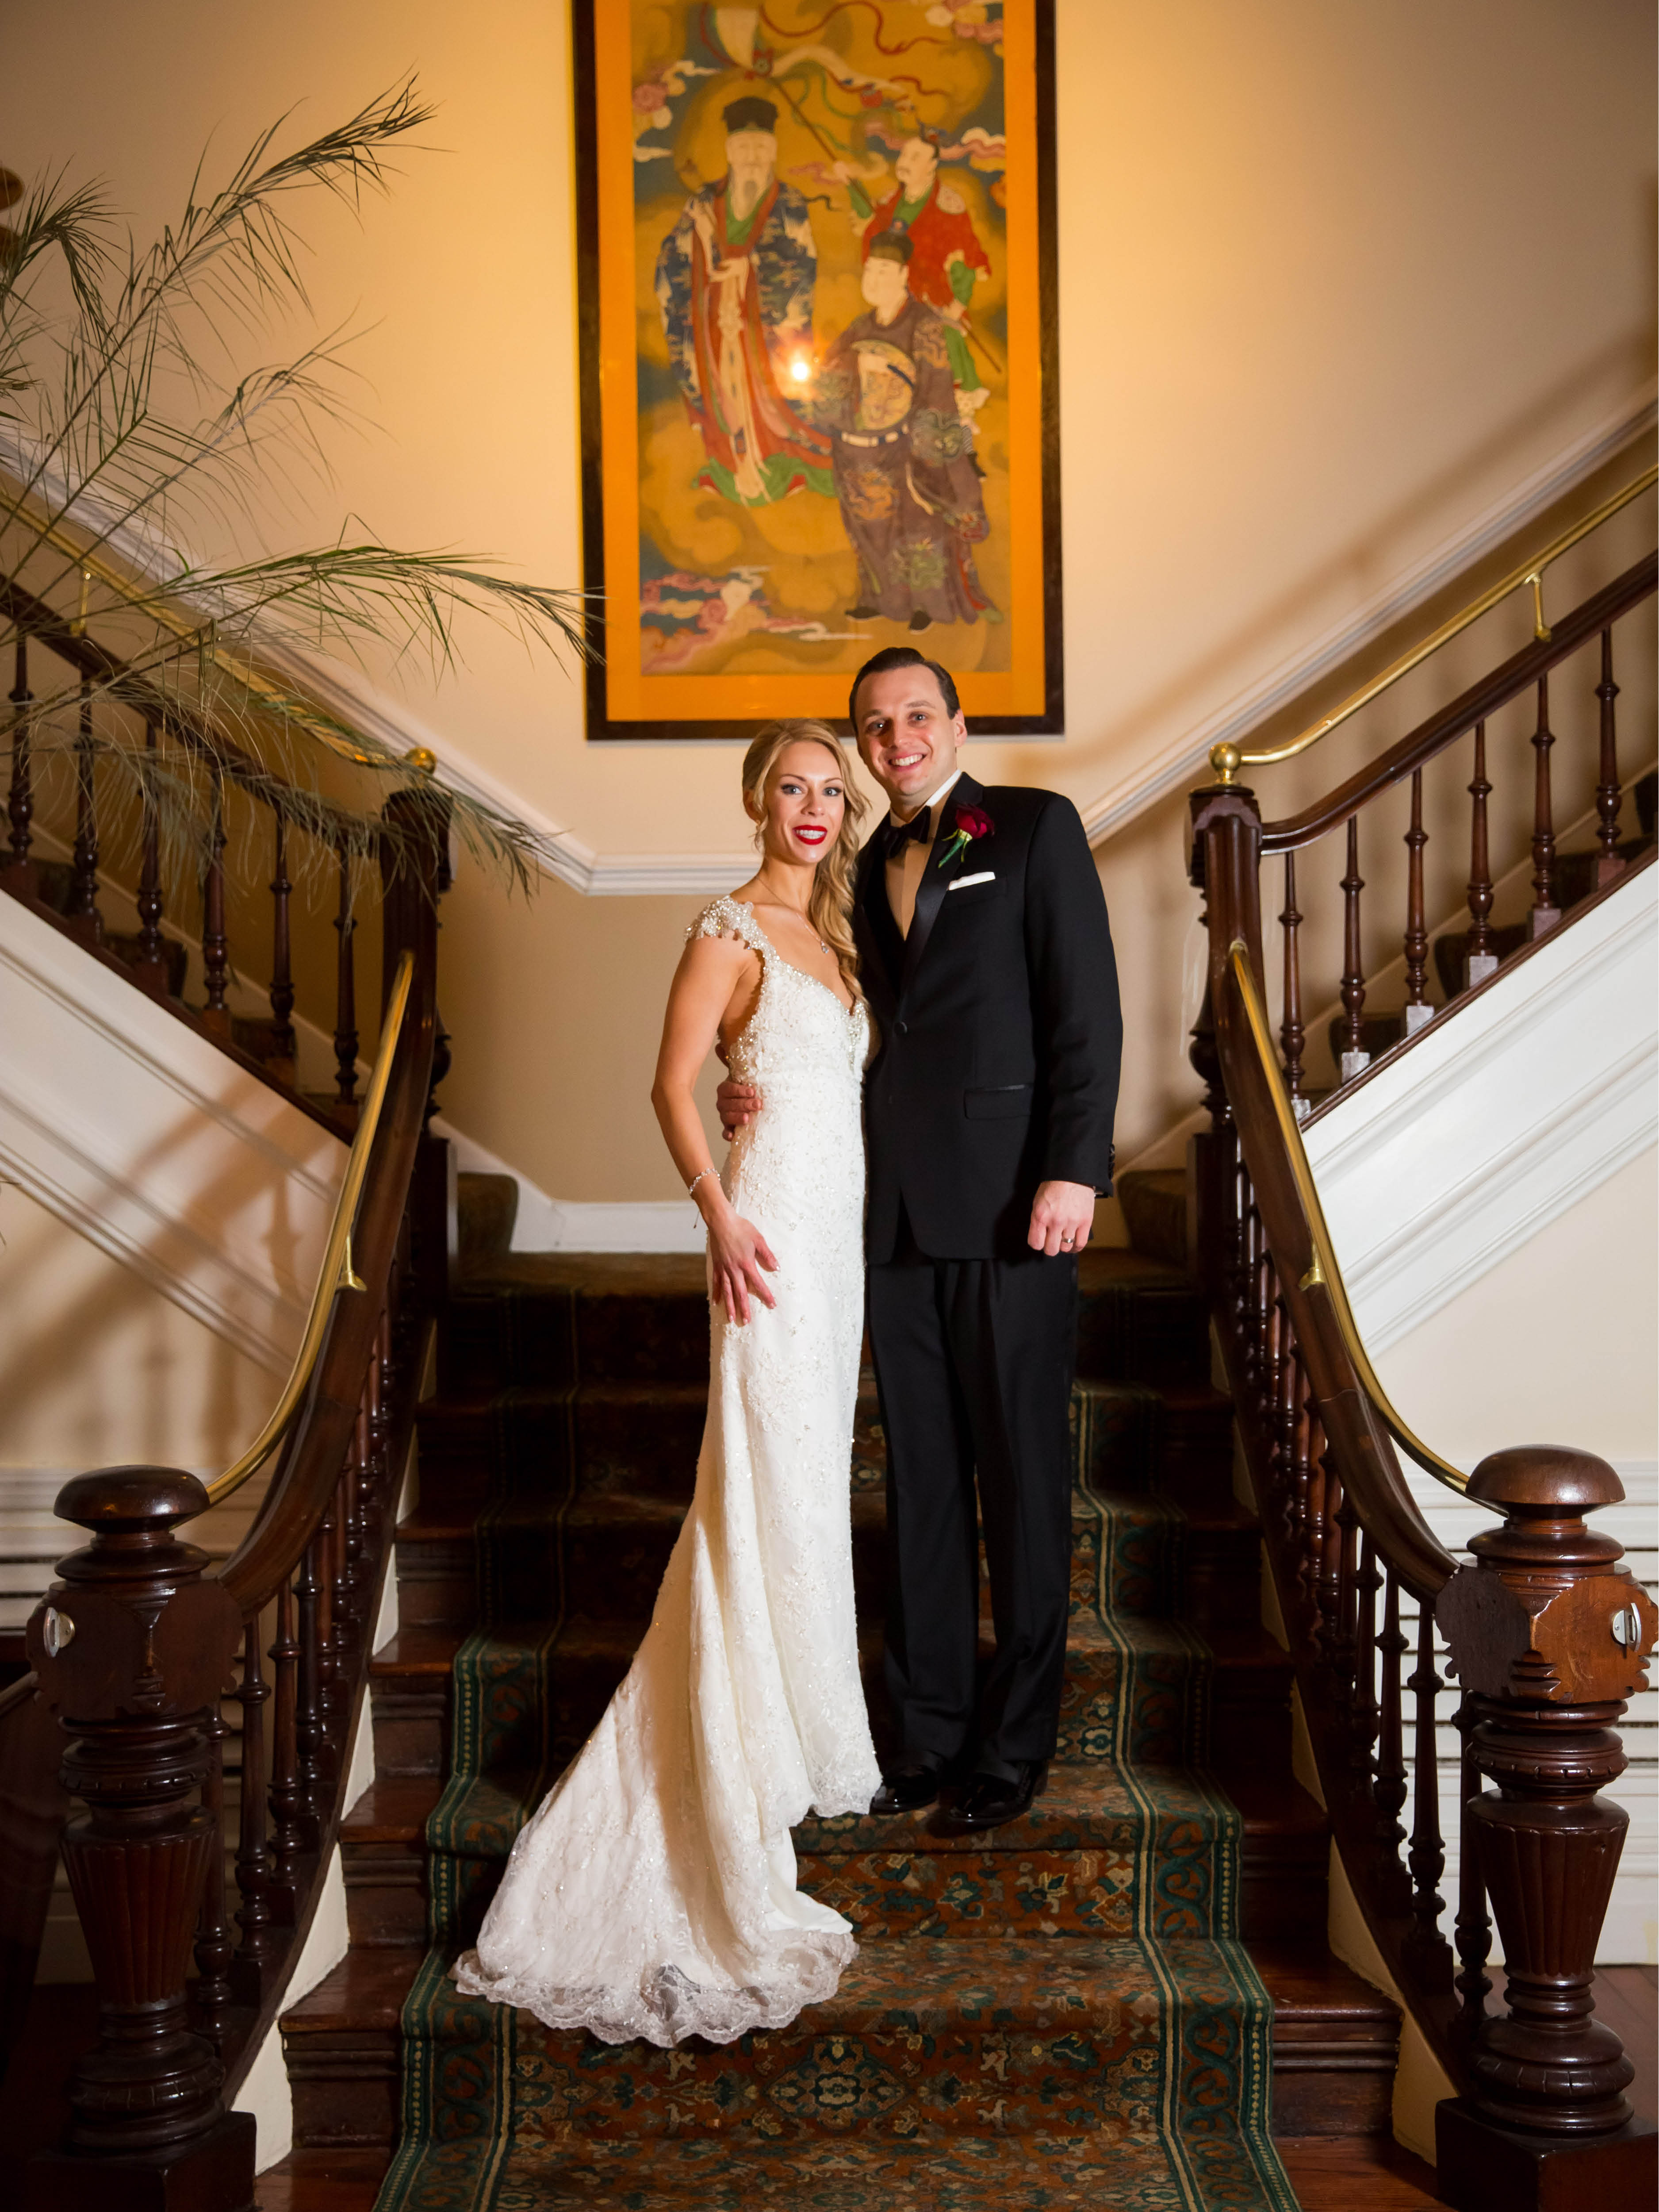 Emma_cleary_photography India House wedding5